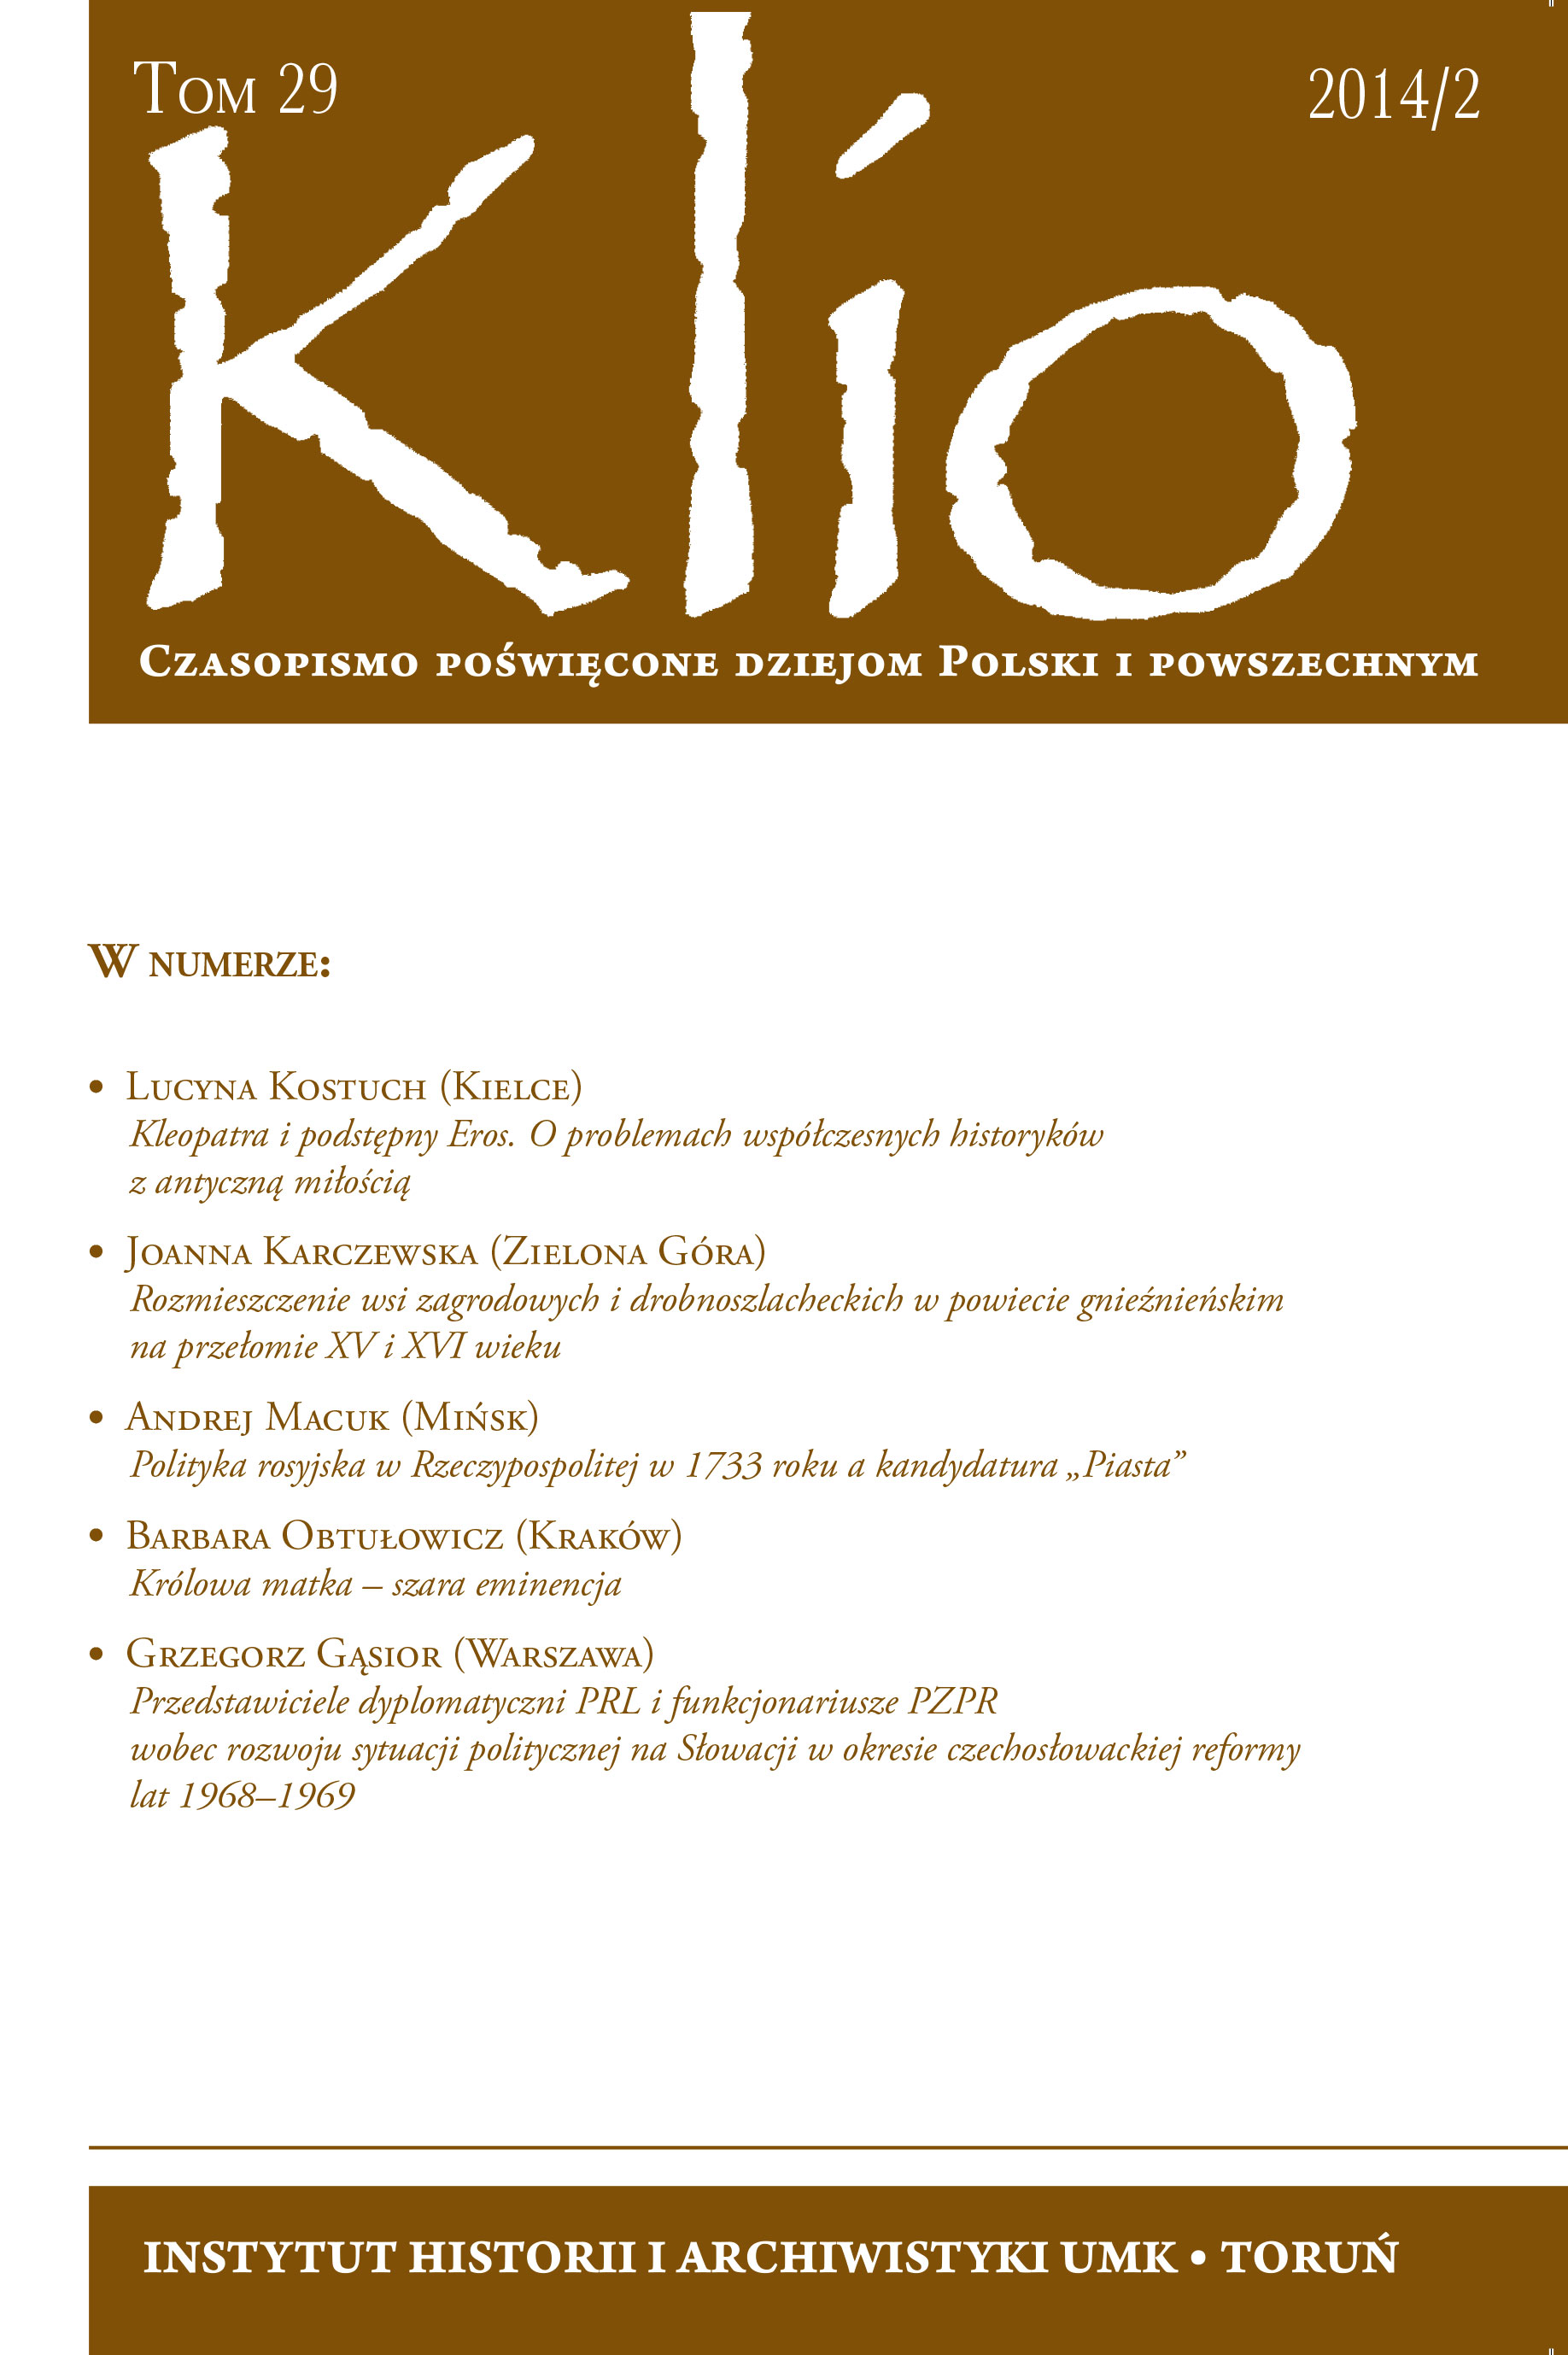 Diplomatic representatives and communist functionaries from People’s Republic of Poland towards political development in Slovakia in the period of Czechoslovak reform in the years 1968–1969 Cover Image